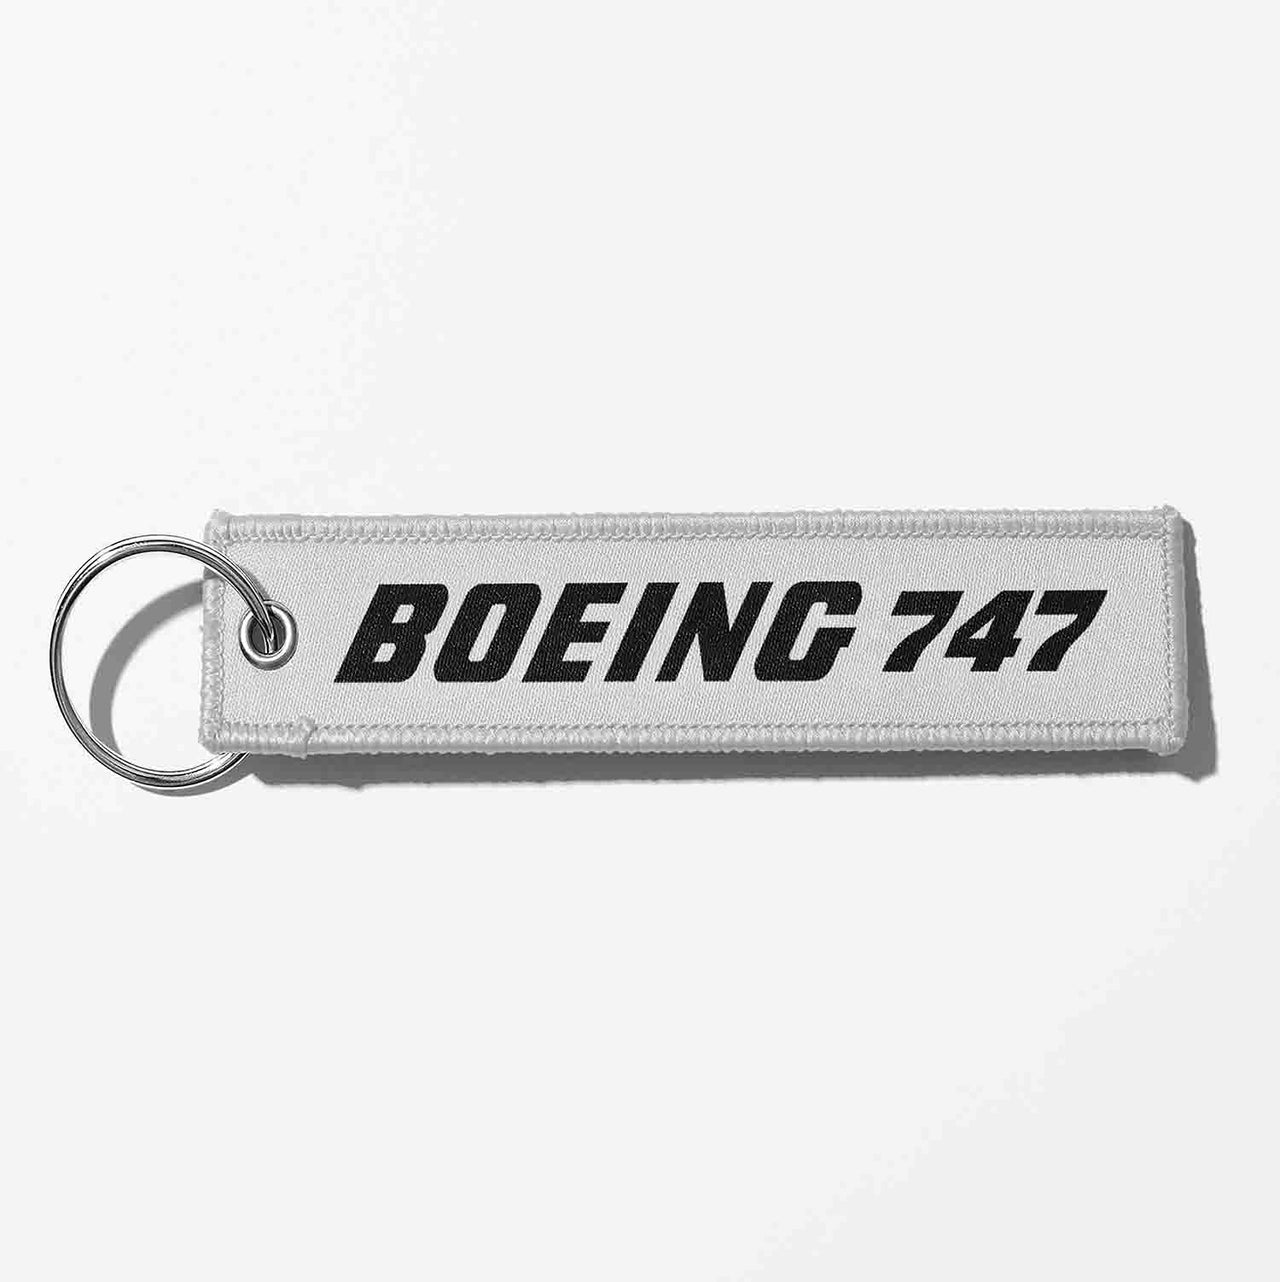 Boeing 747 & Text Designed Key Chains